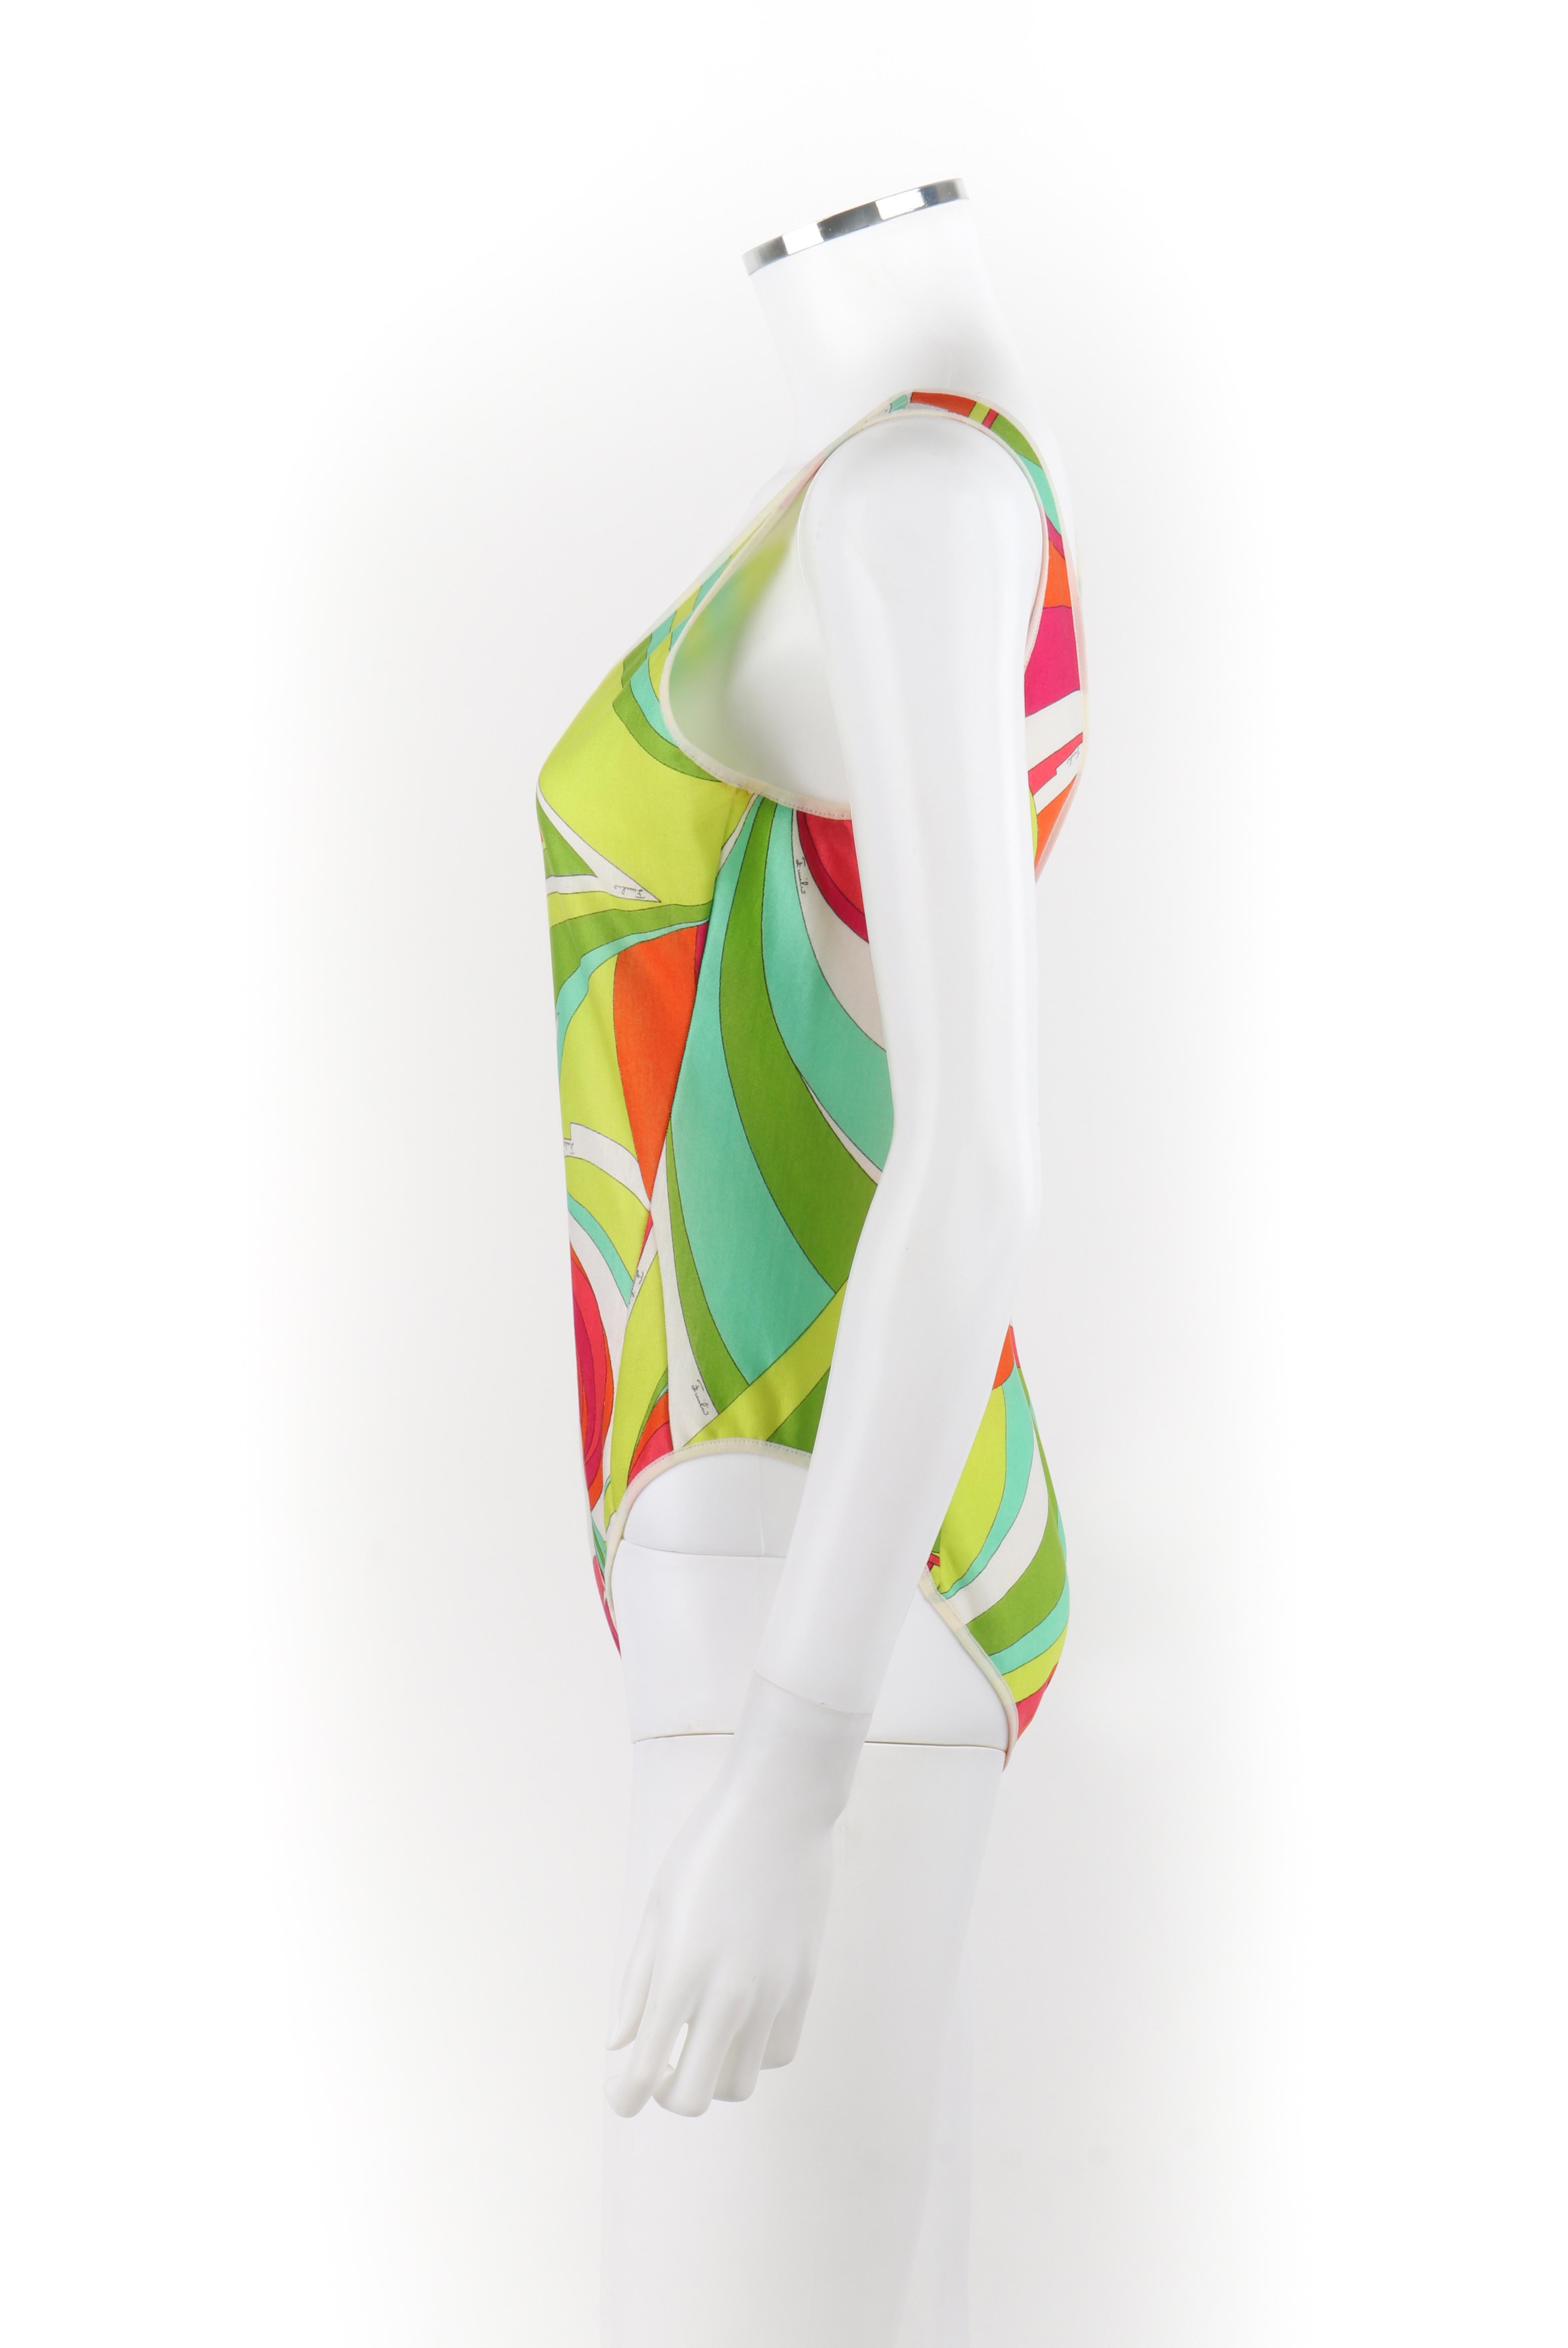 EMILIO PUCCI c.1970s Multicolor Op Art High-Cut One Piece Snap Bodysuit Swimsuit In Good Condition For Sale In Thiensville, WI